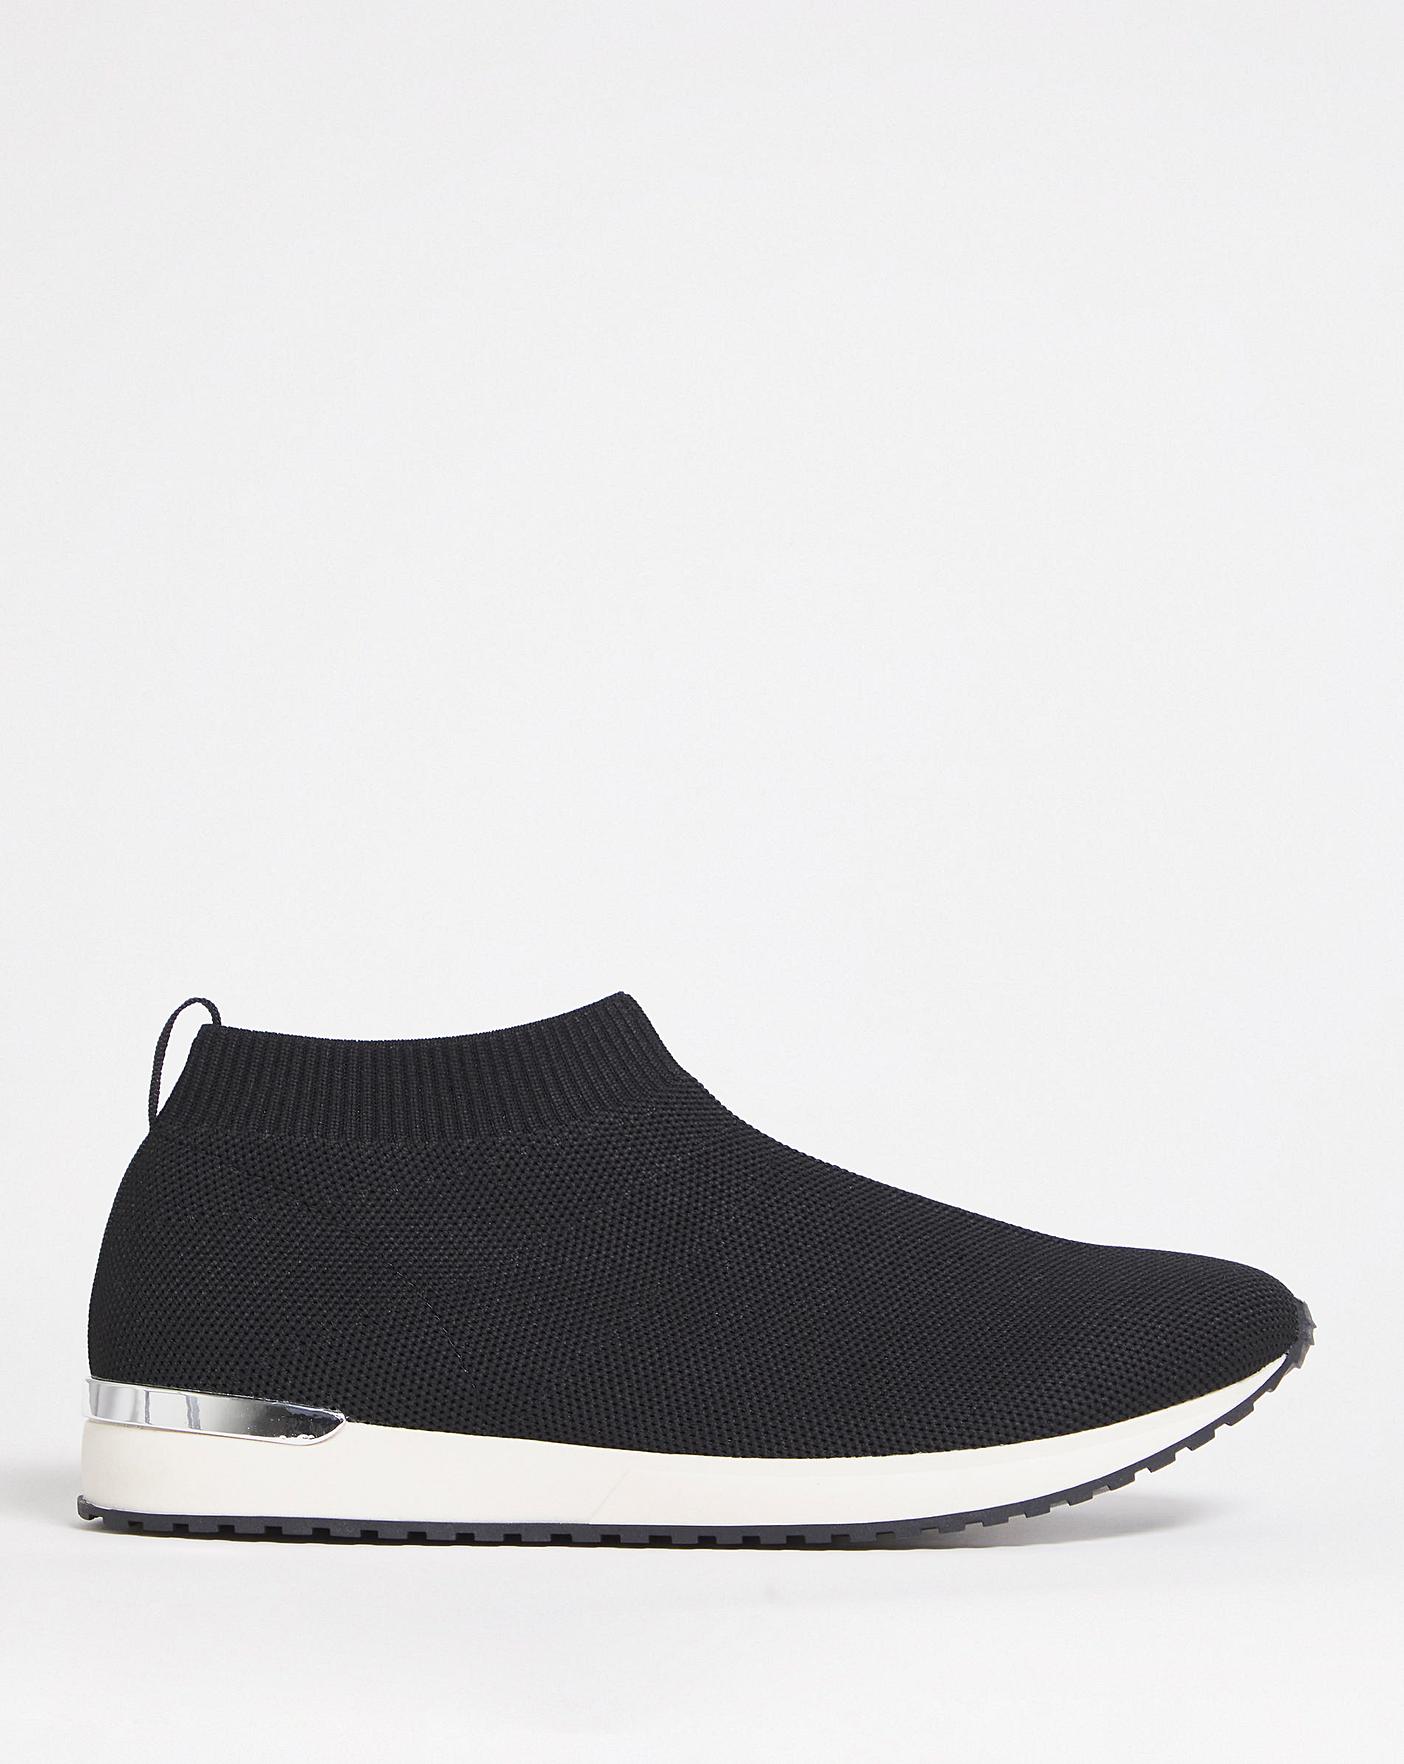 Cushion Walk Fly Knit Bootee E Fit | J D Williams